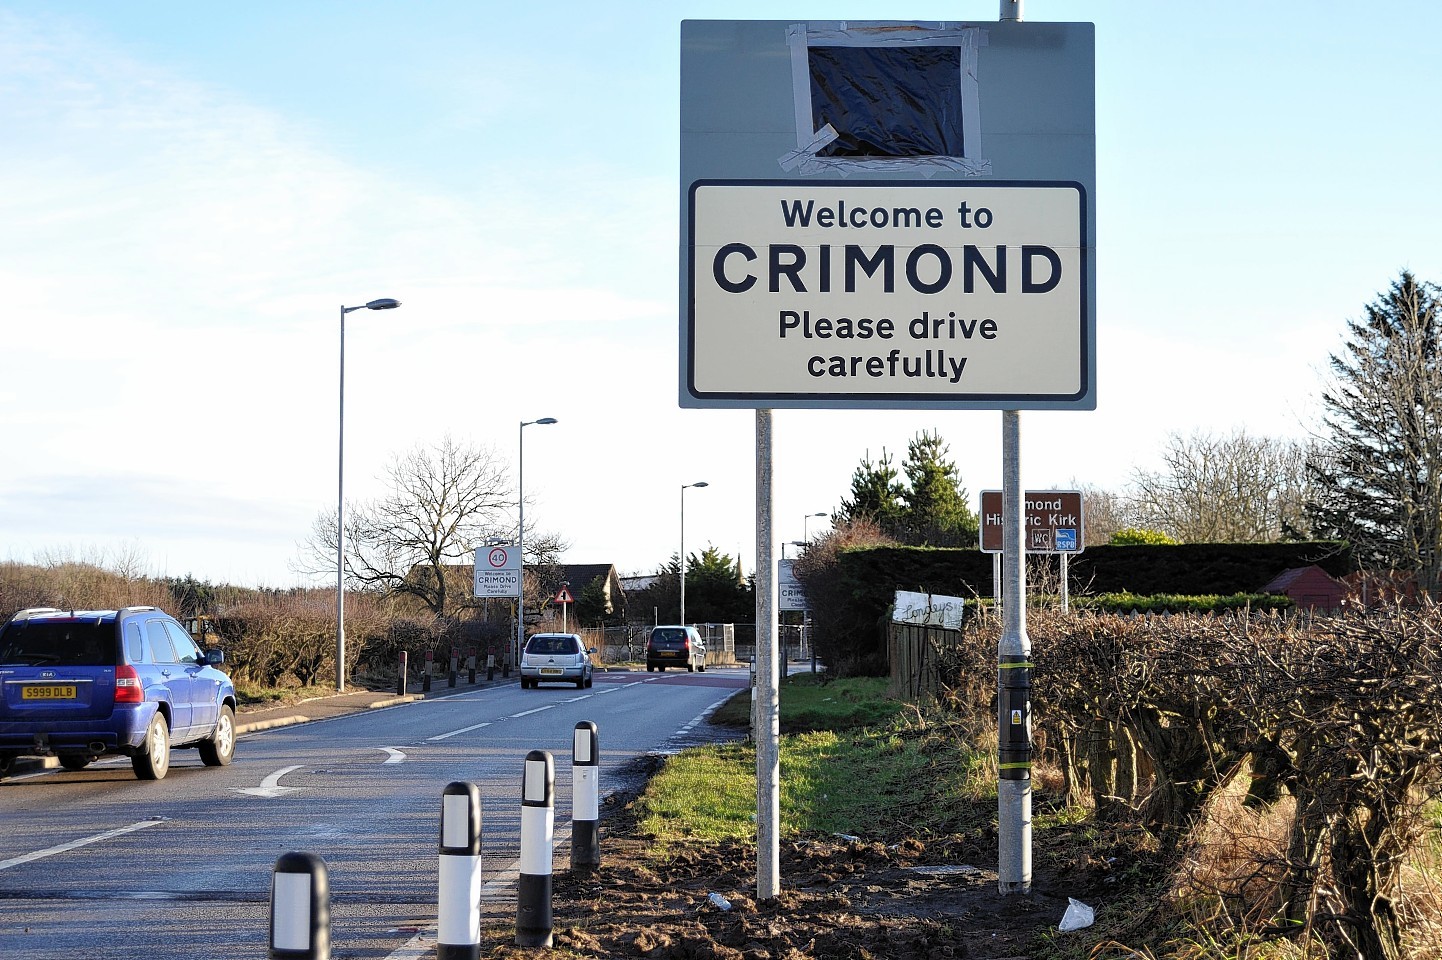 The turbines near Crimond are inspected every two years for noise emissions